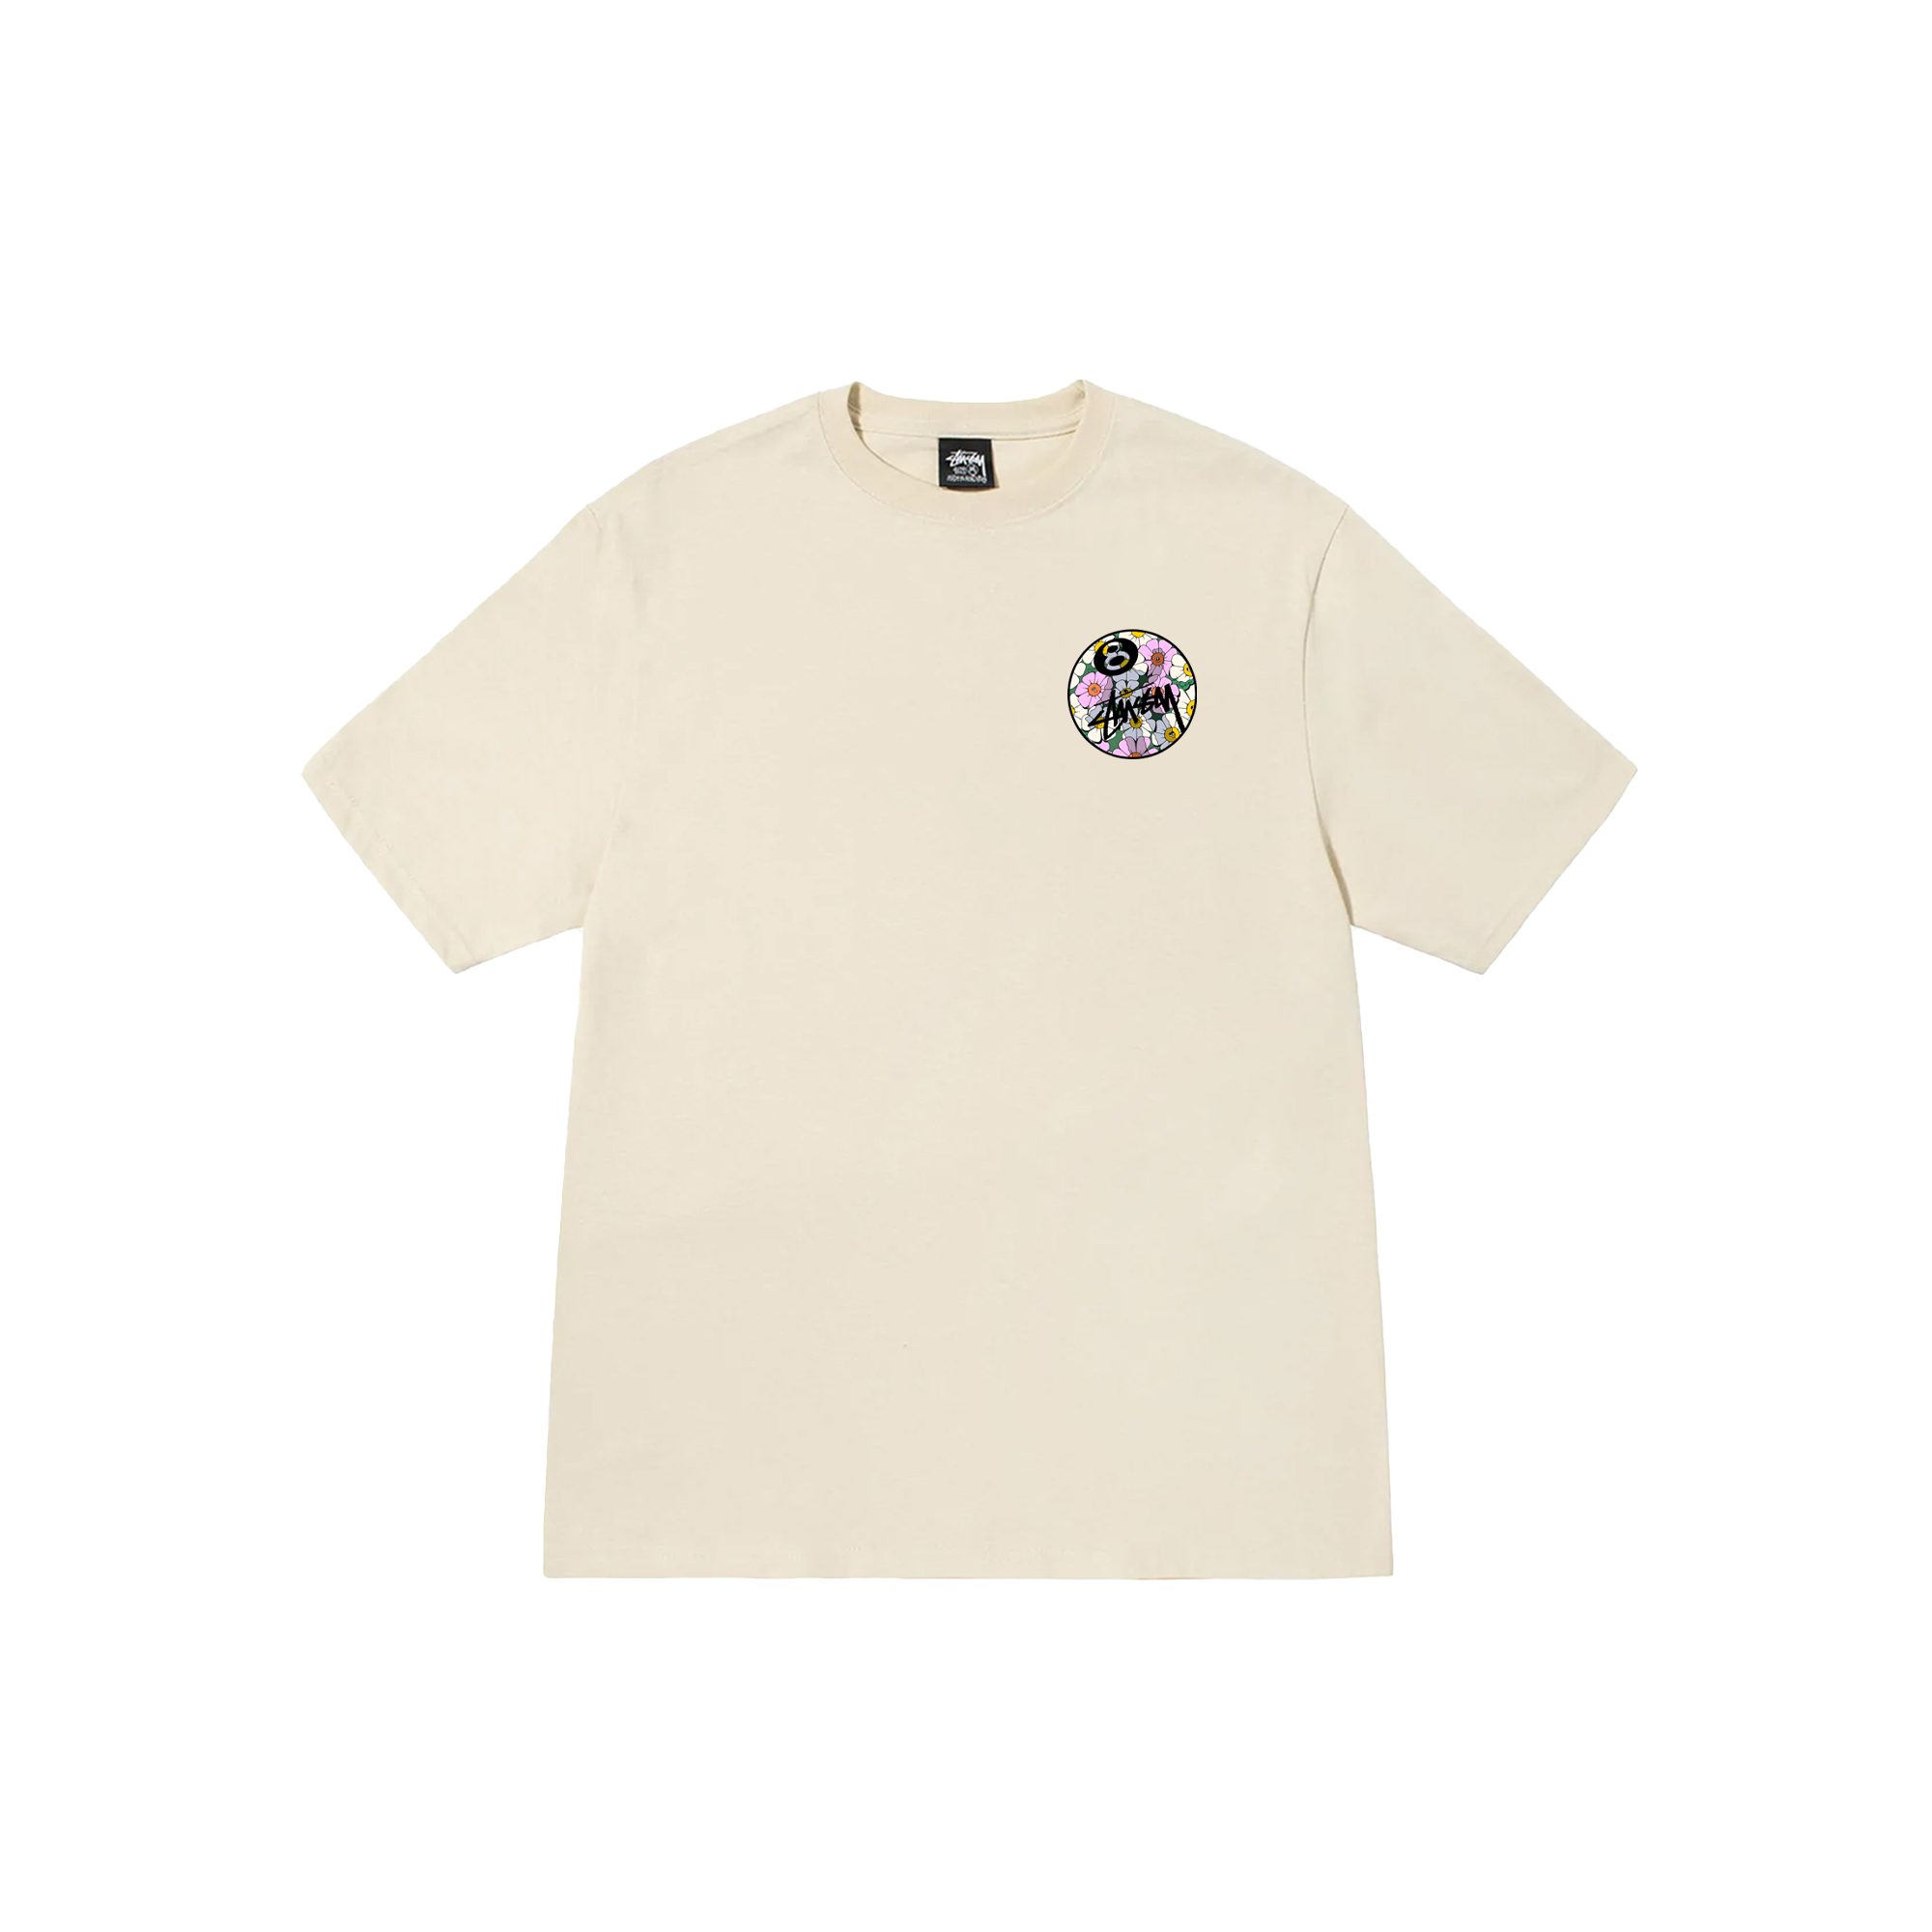 Stussy Floral Happy Days T-Shirt